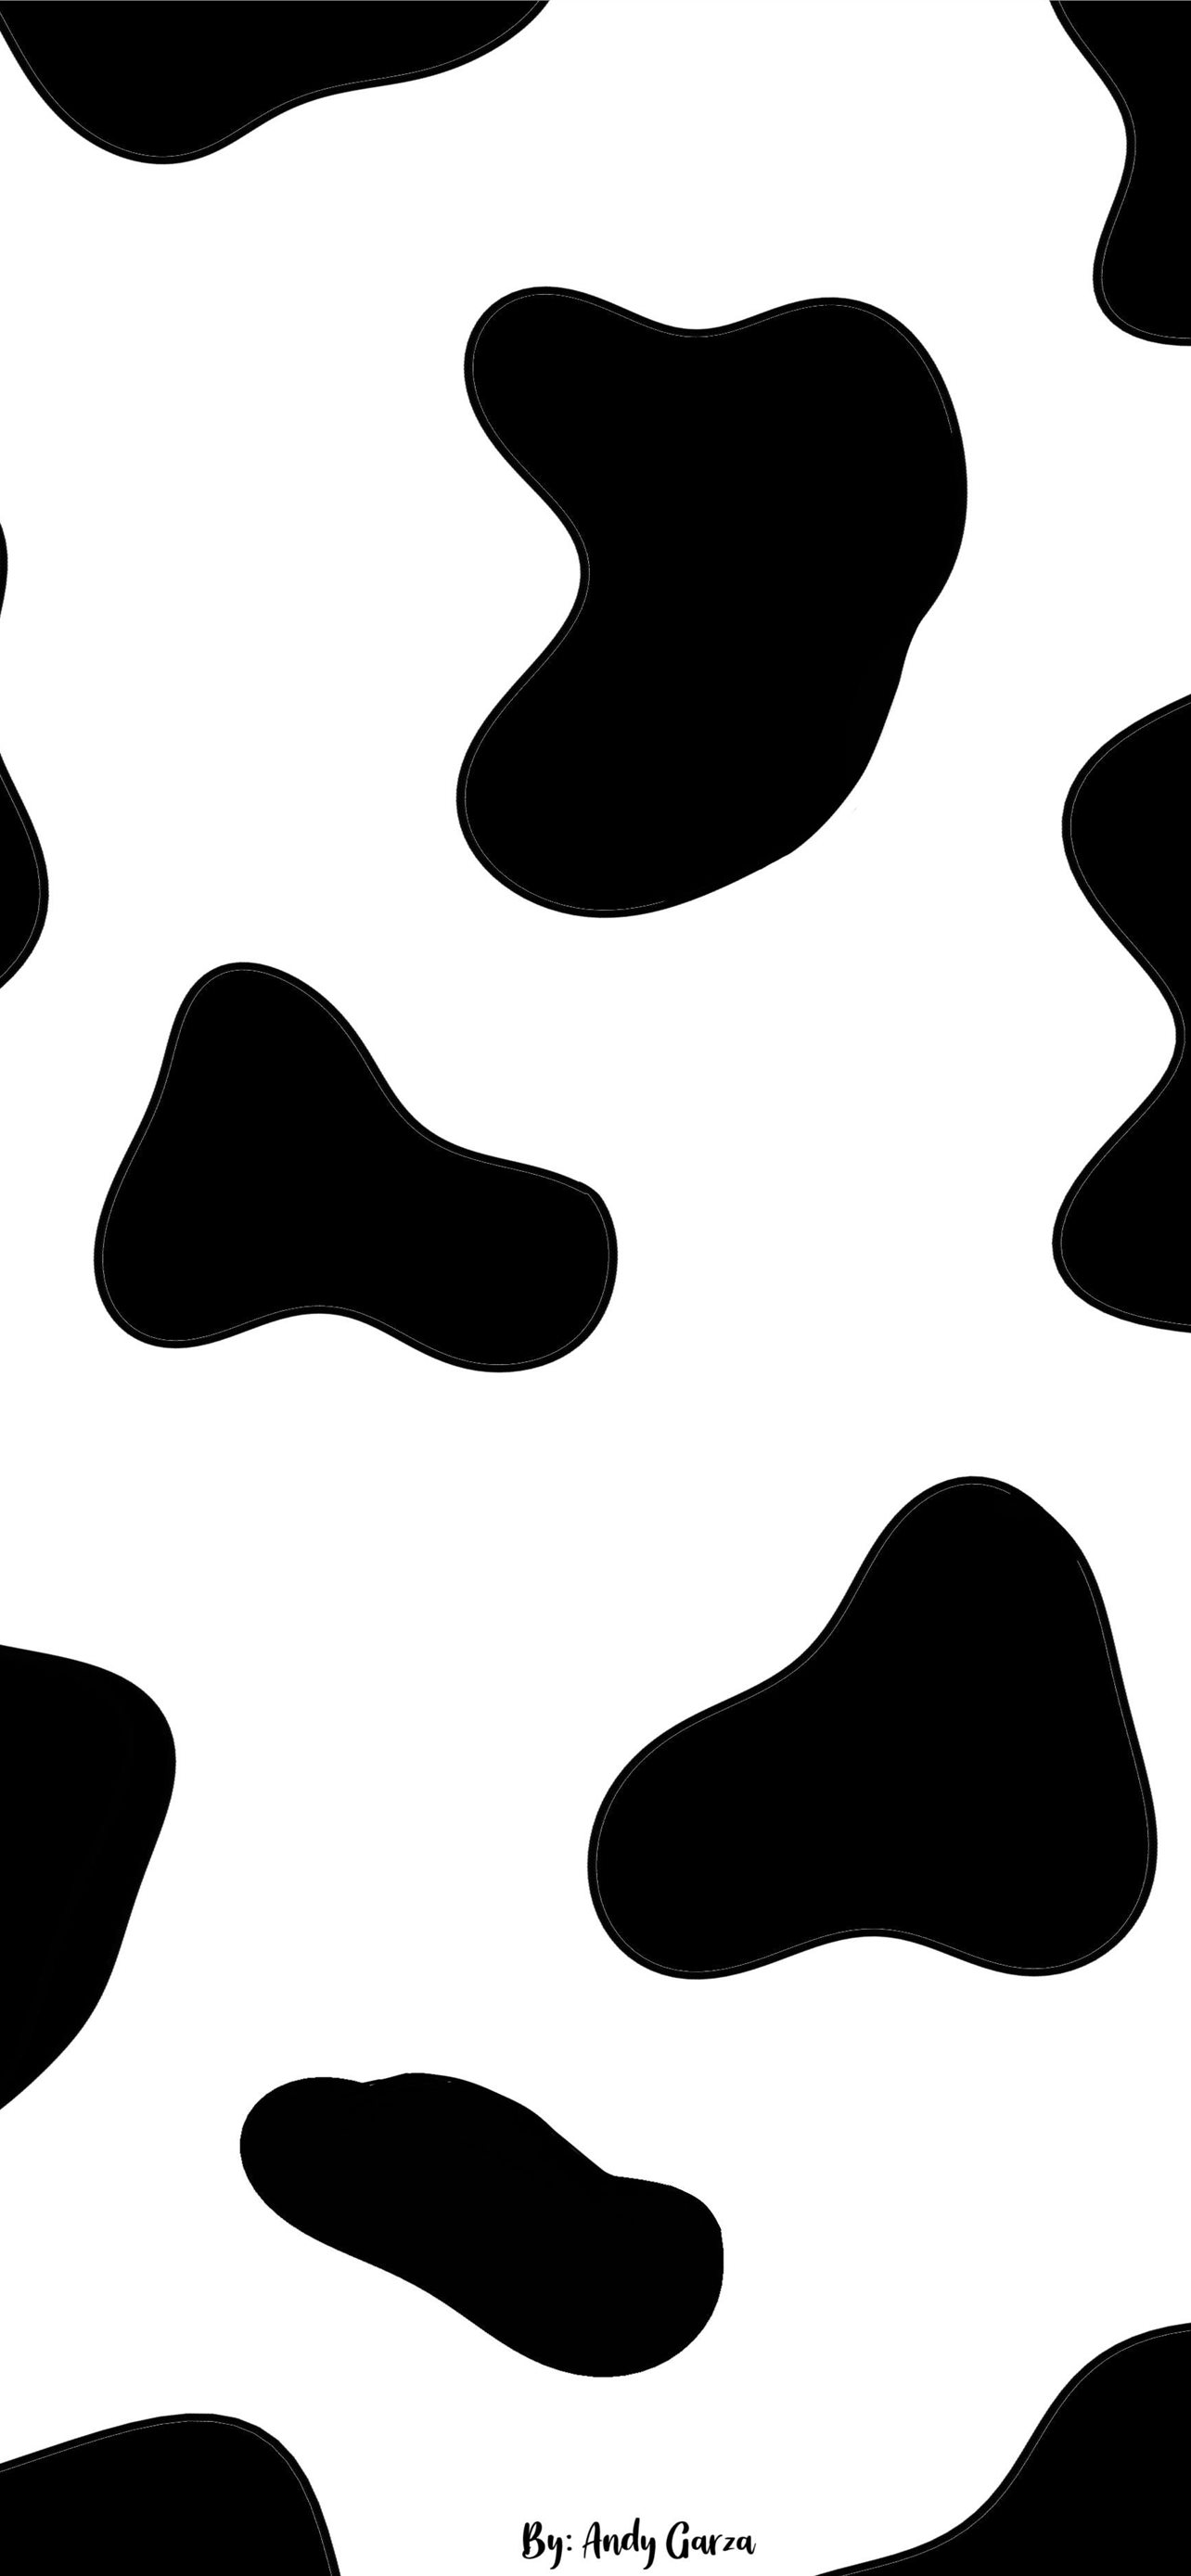 Cow Print Wallpaper Discover more Android Cute Iphone large Pink  wallpapers httpswwwenjpgcomcowprint30  Cow wallpaper Cow print  wallpaper Cow print